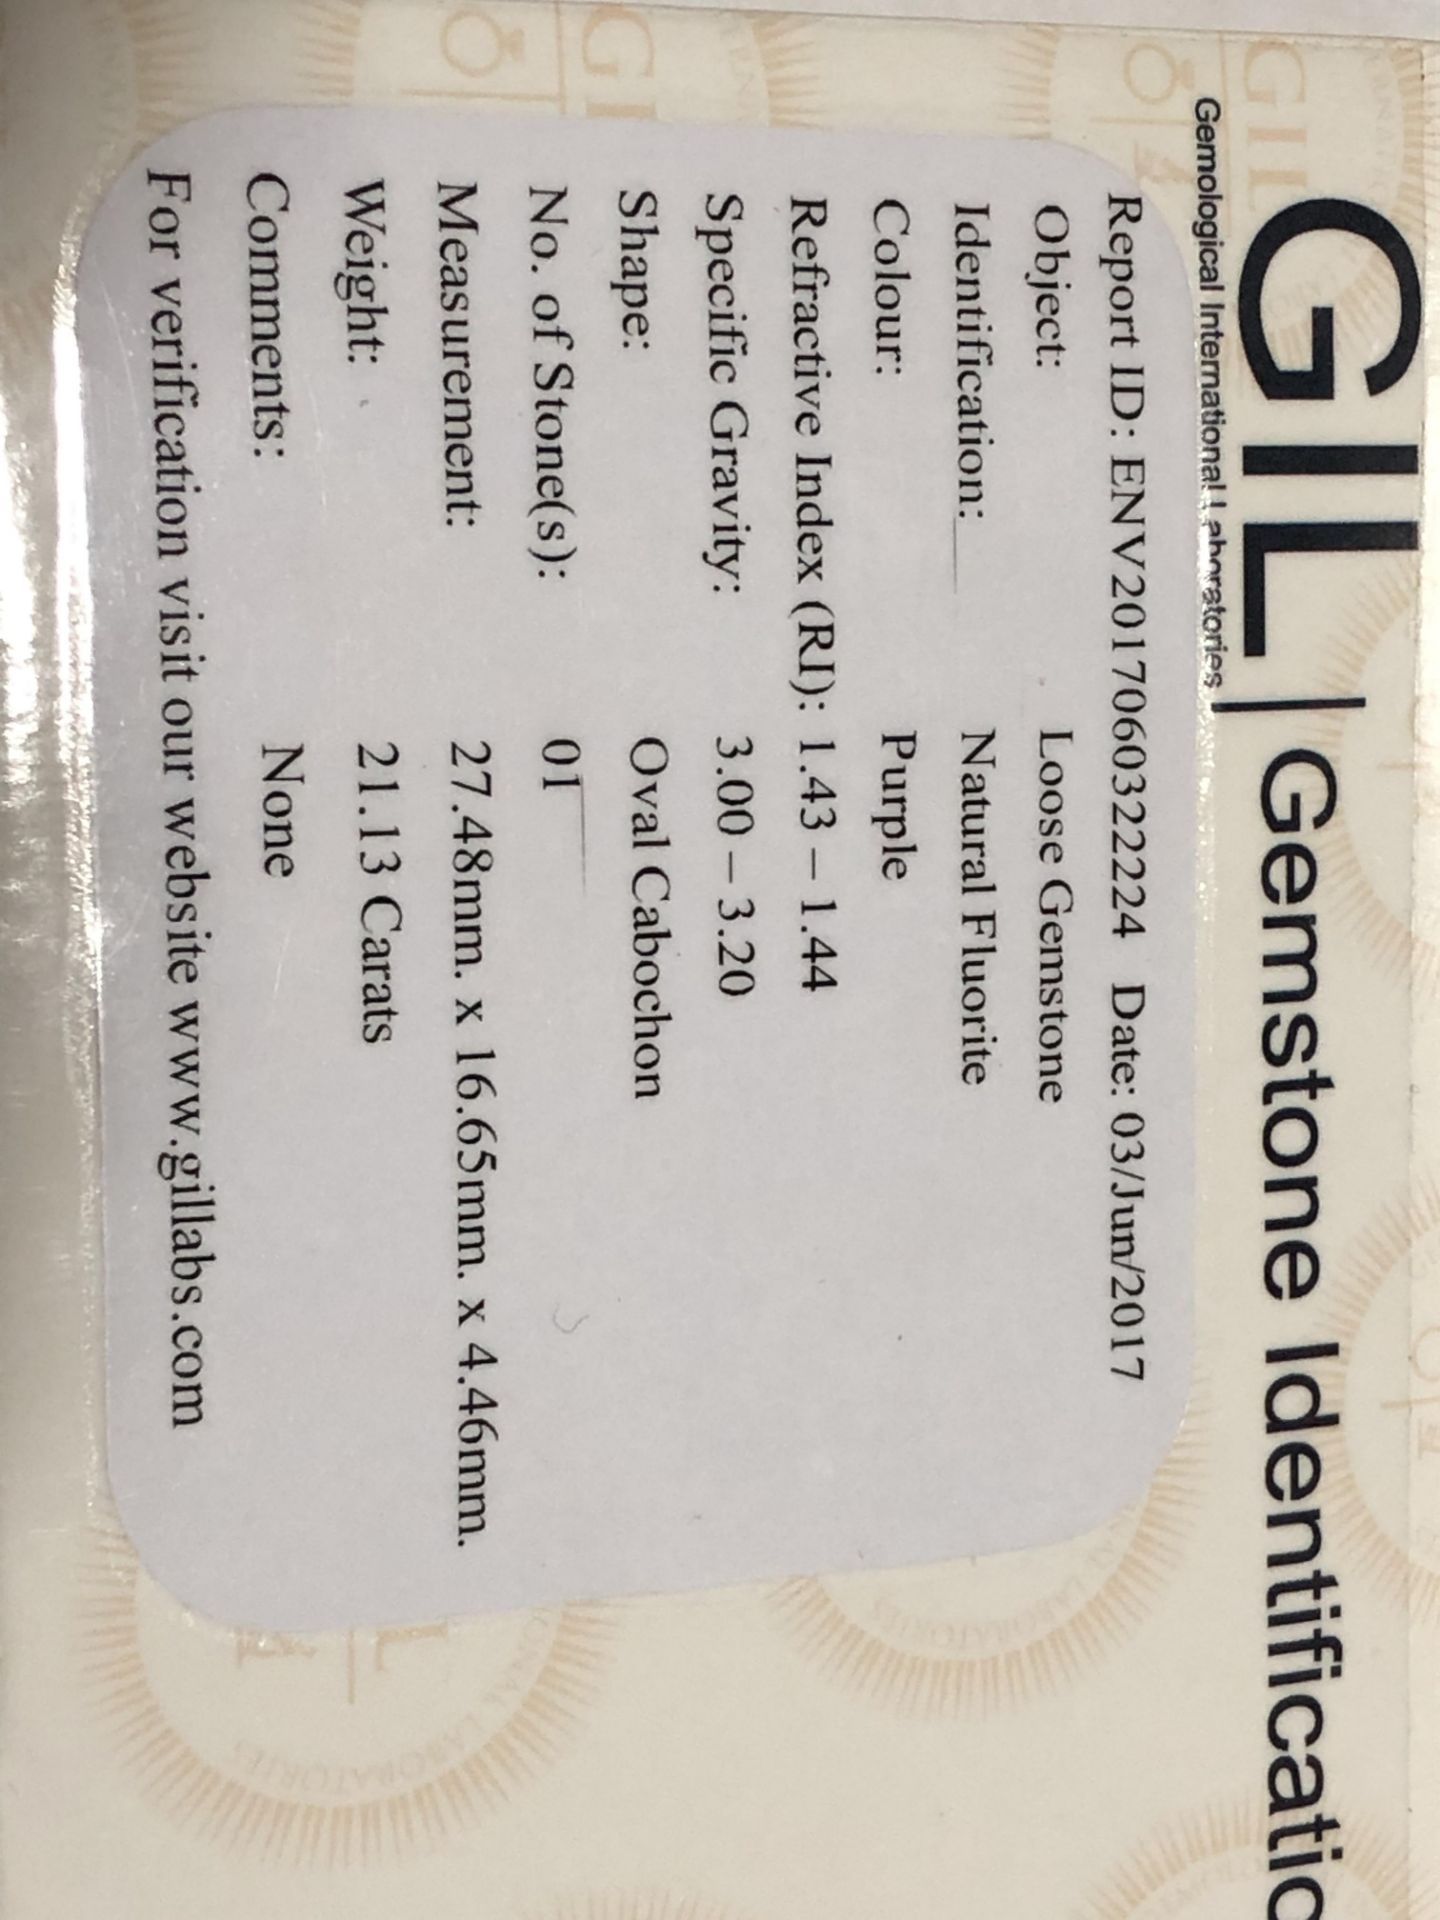 21.13ct Natural Fluorite with GIL Certificate - Image 9 of 9